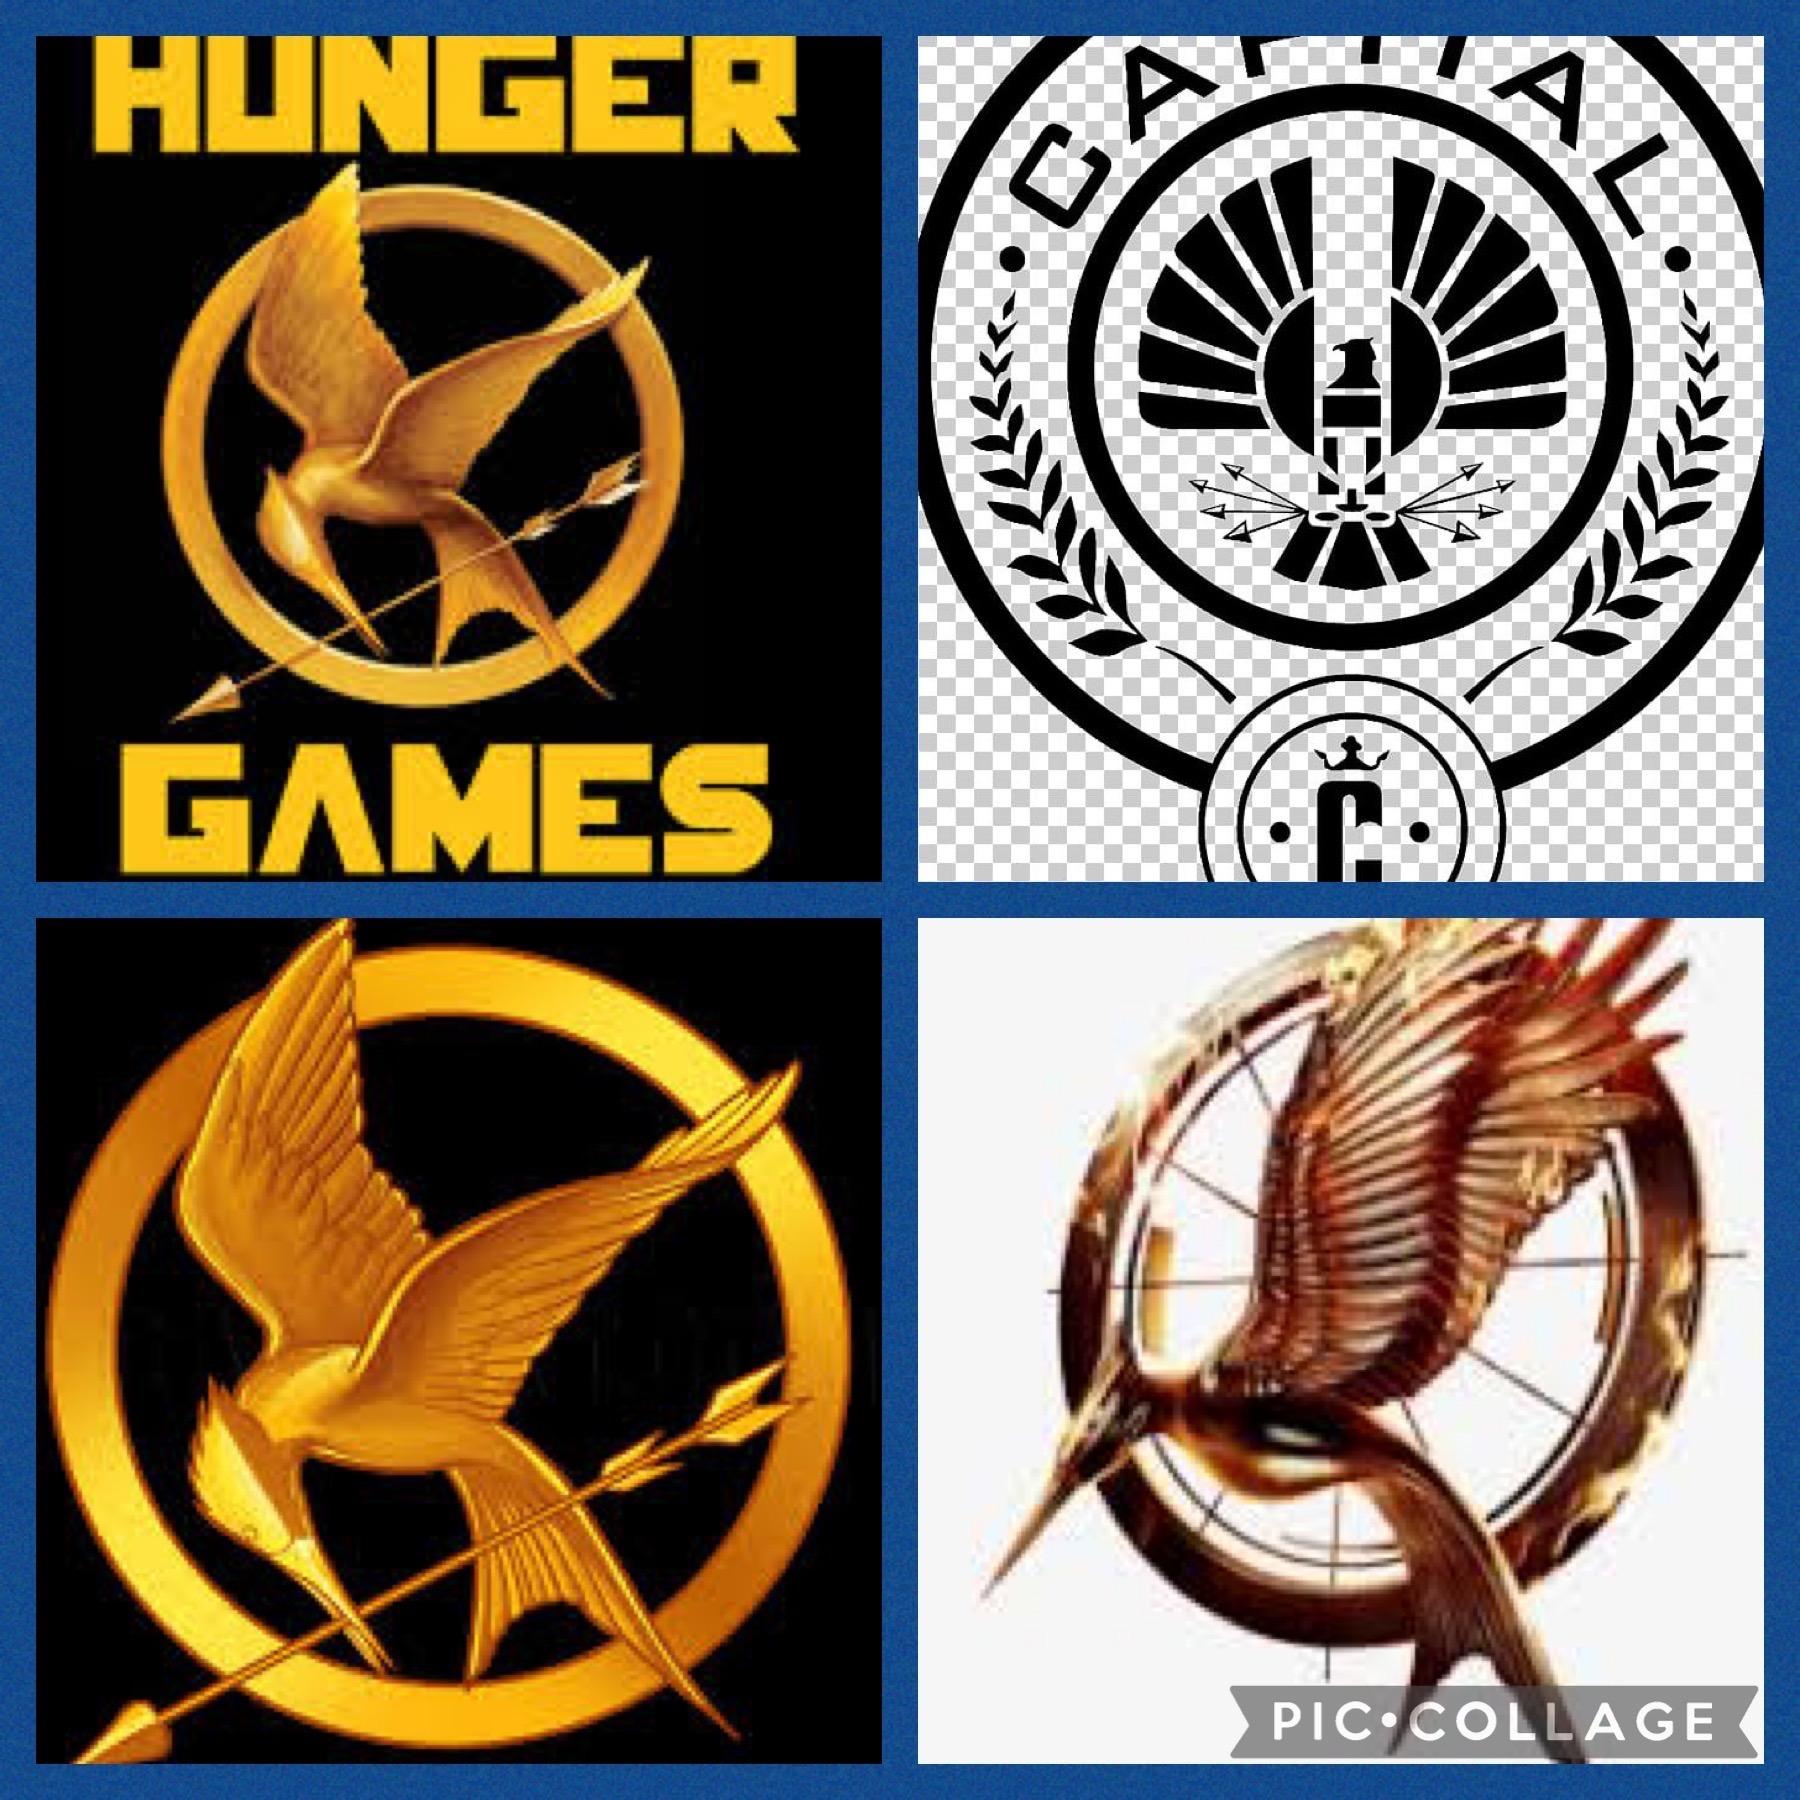 The Hunger Games: What if’s